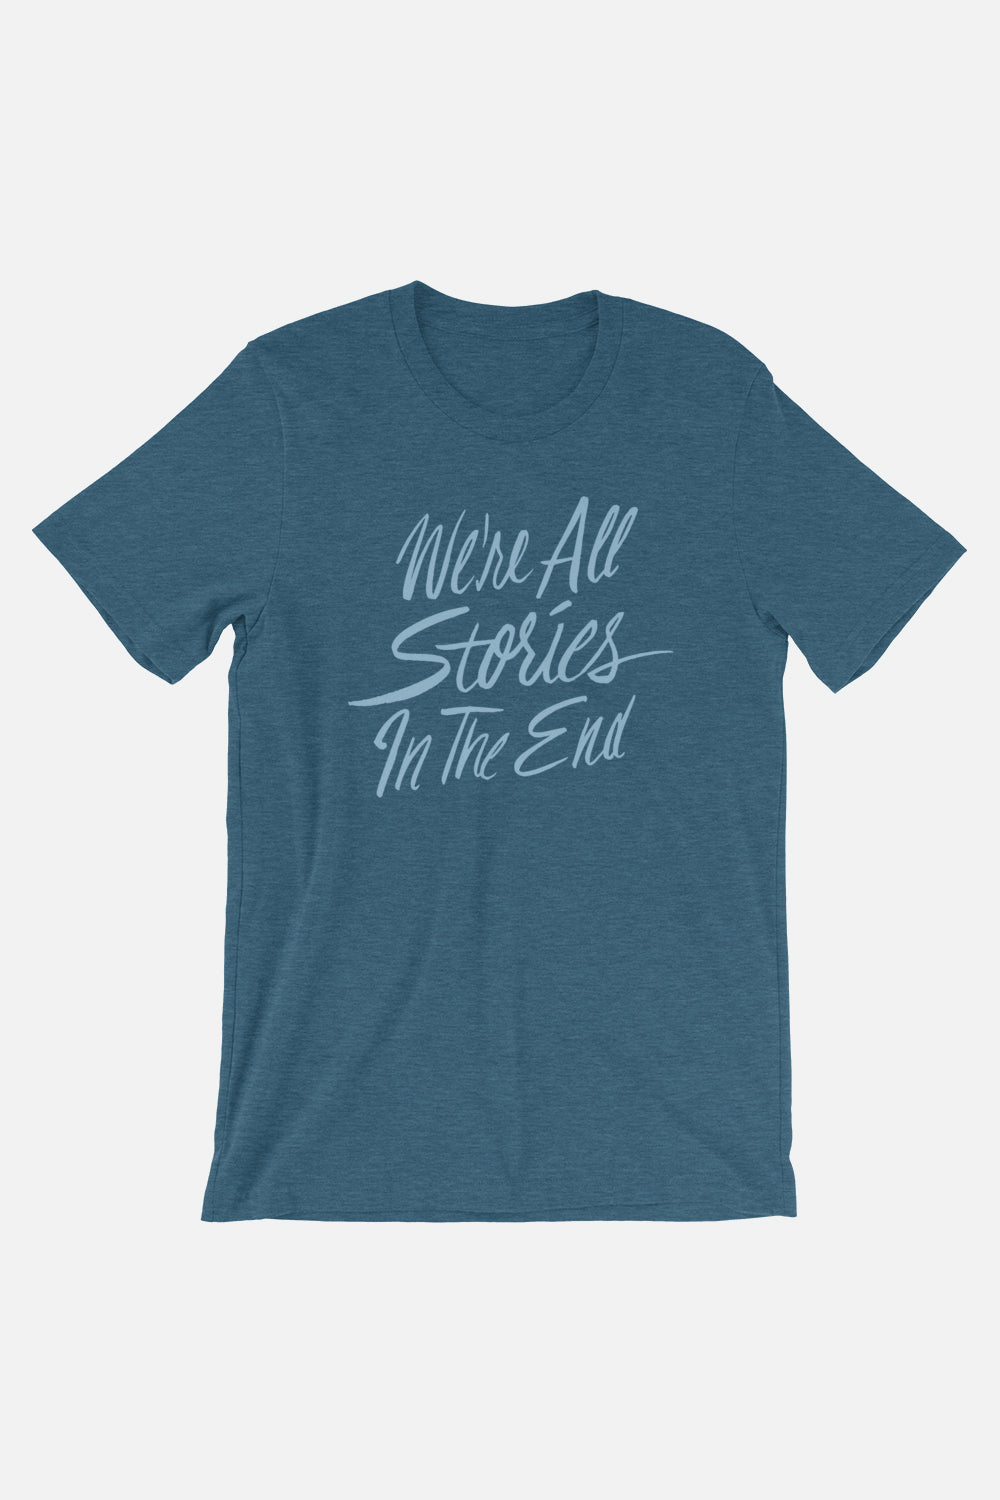 We're All Stories Unisex T-Shirt